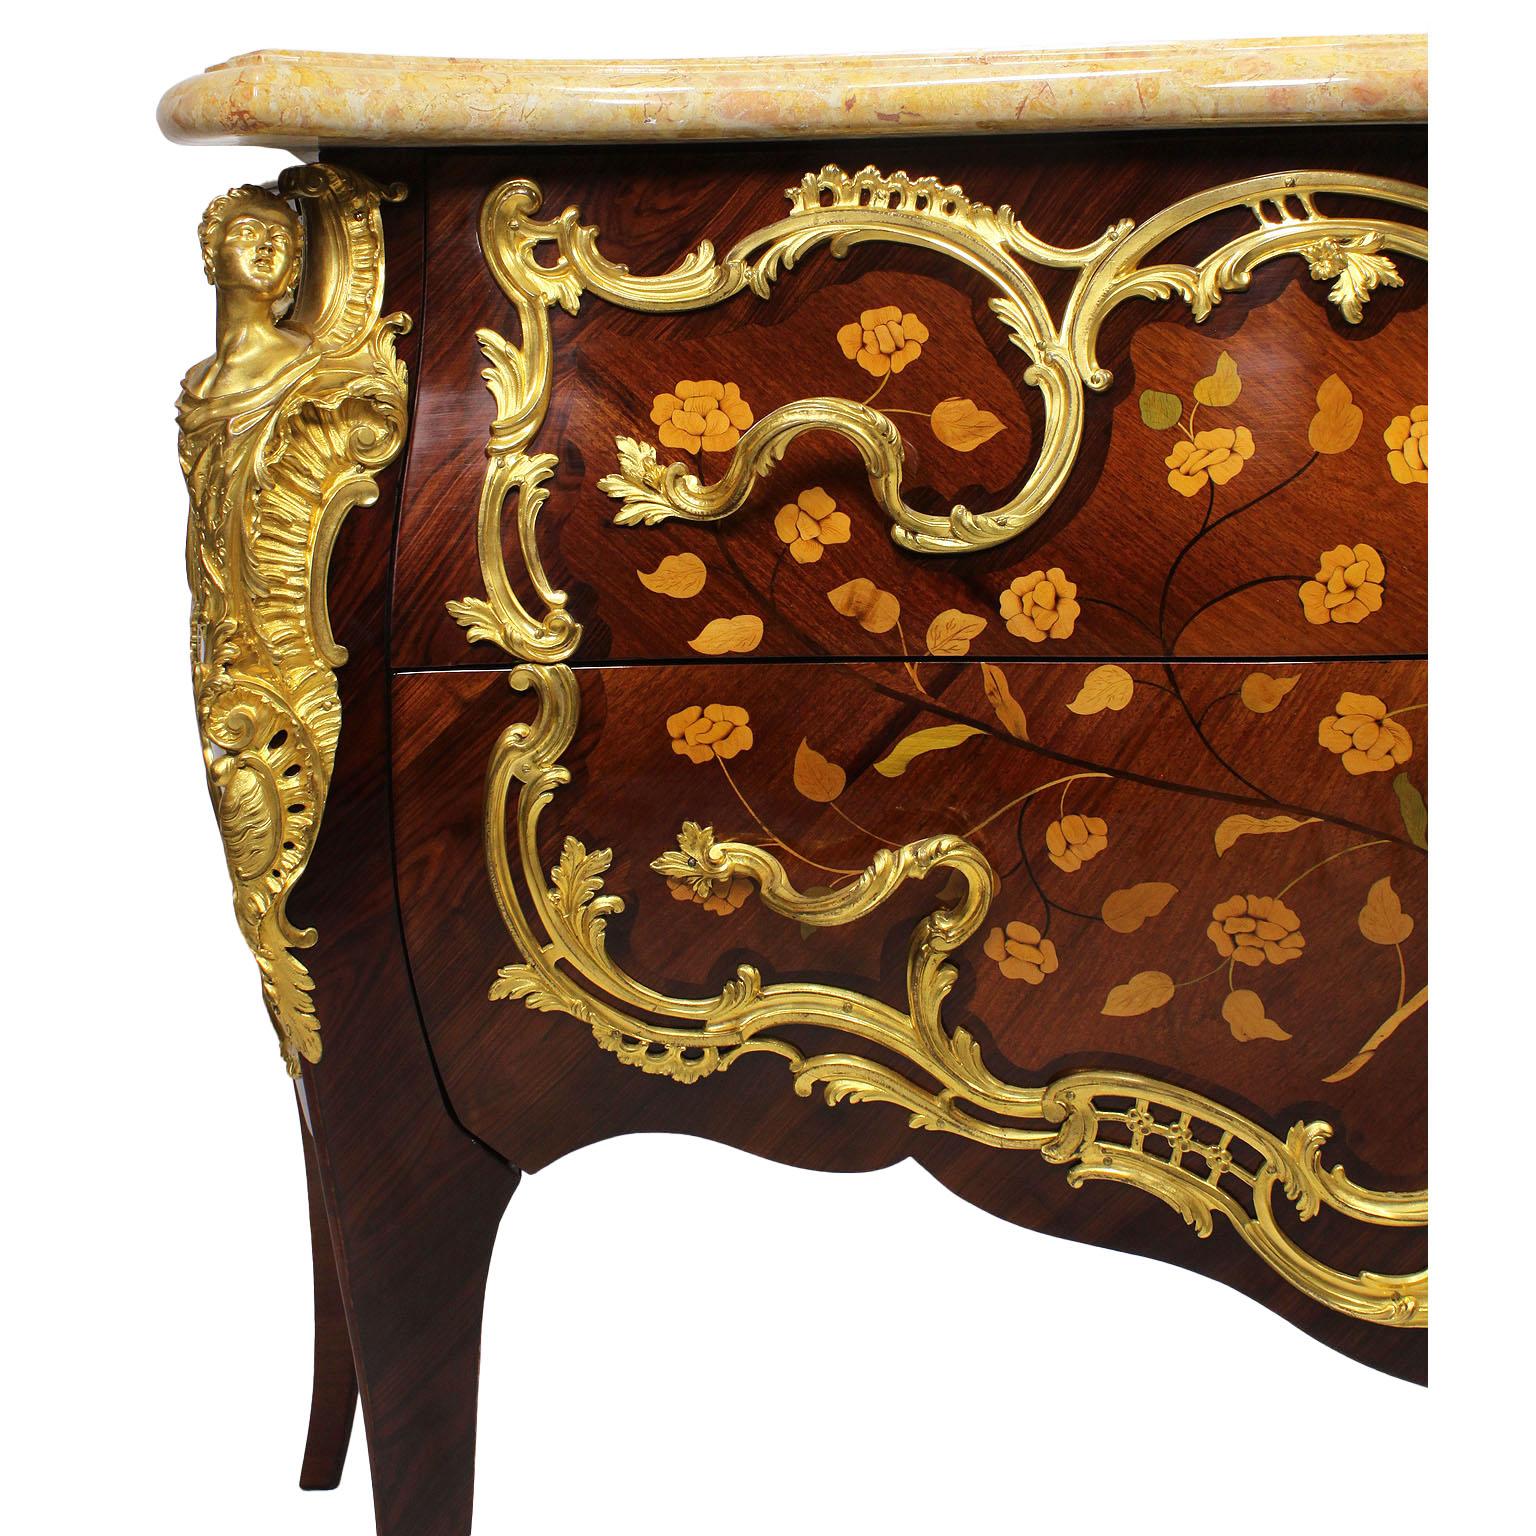 French 19th Century Louis XV Style Gilt Bronze-Mounted Marquetry Commodes, Pair For Sale 3